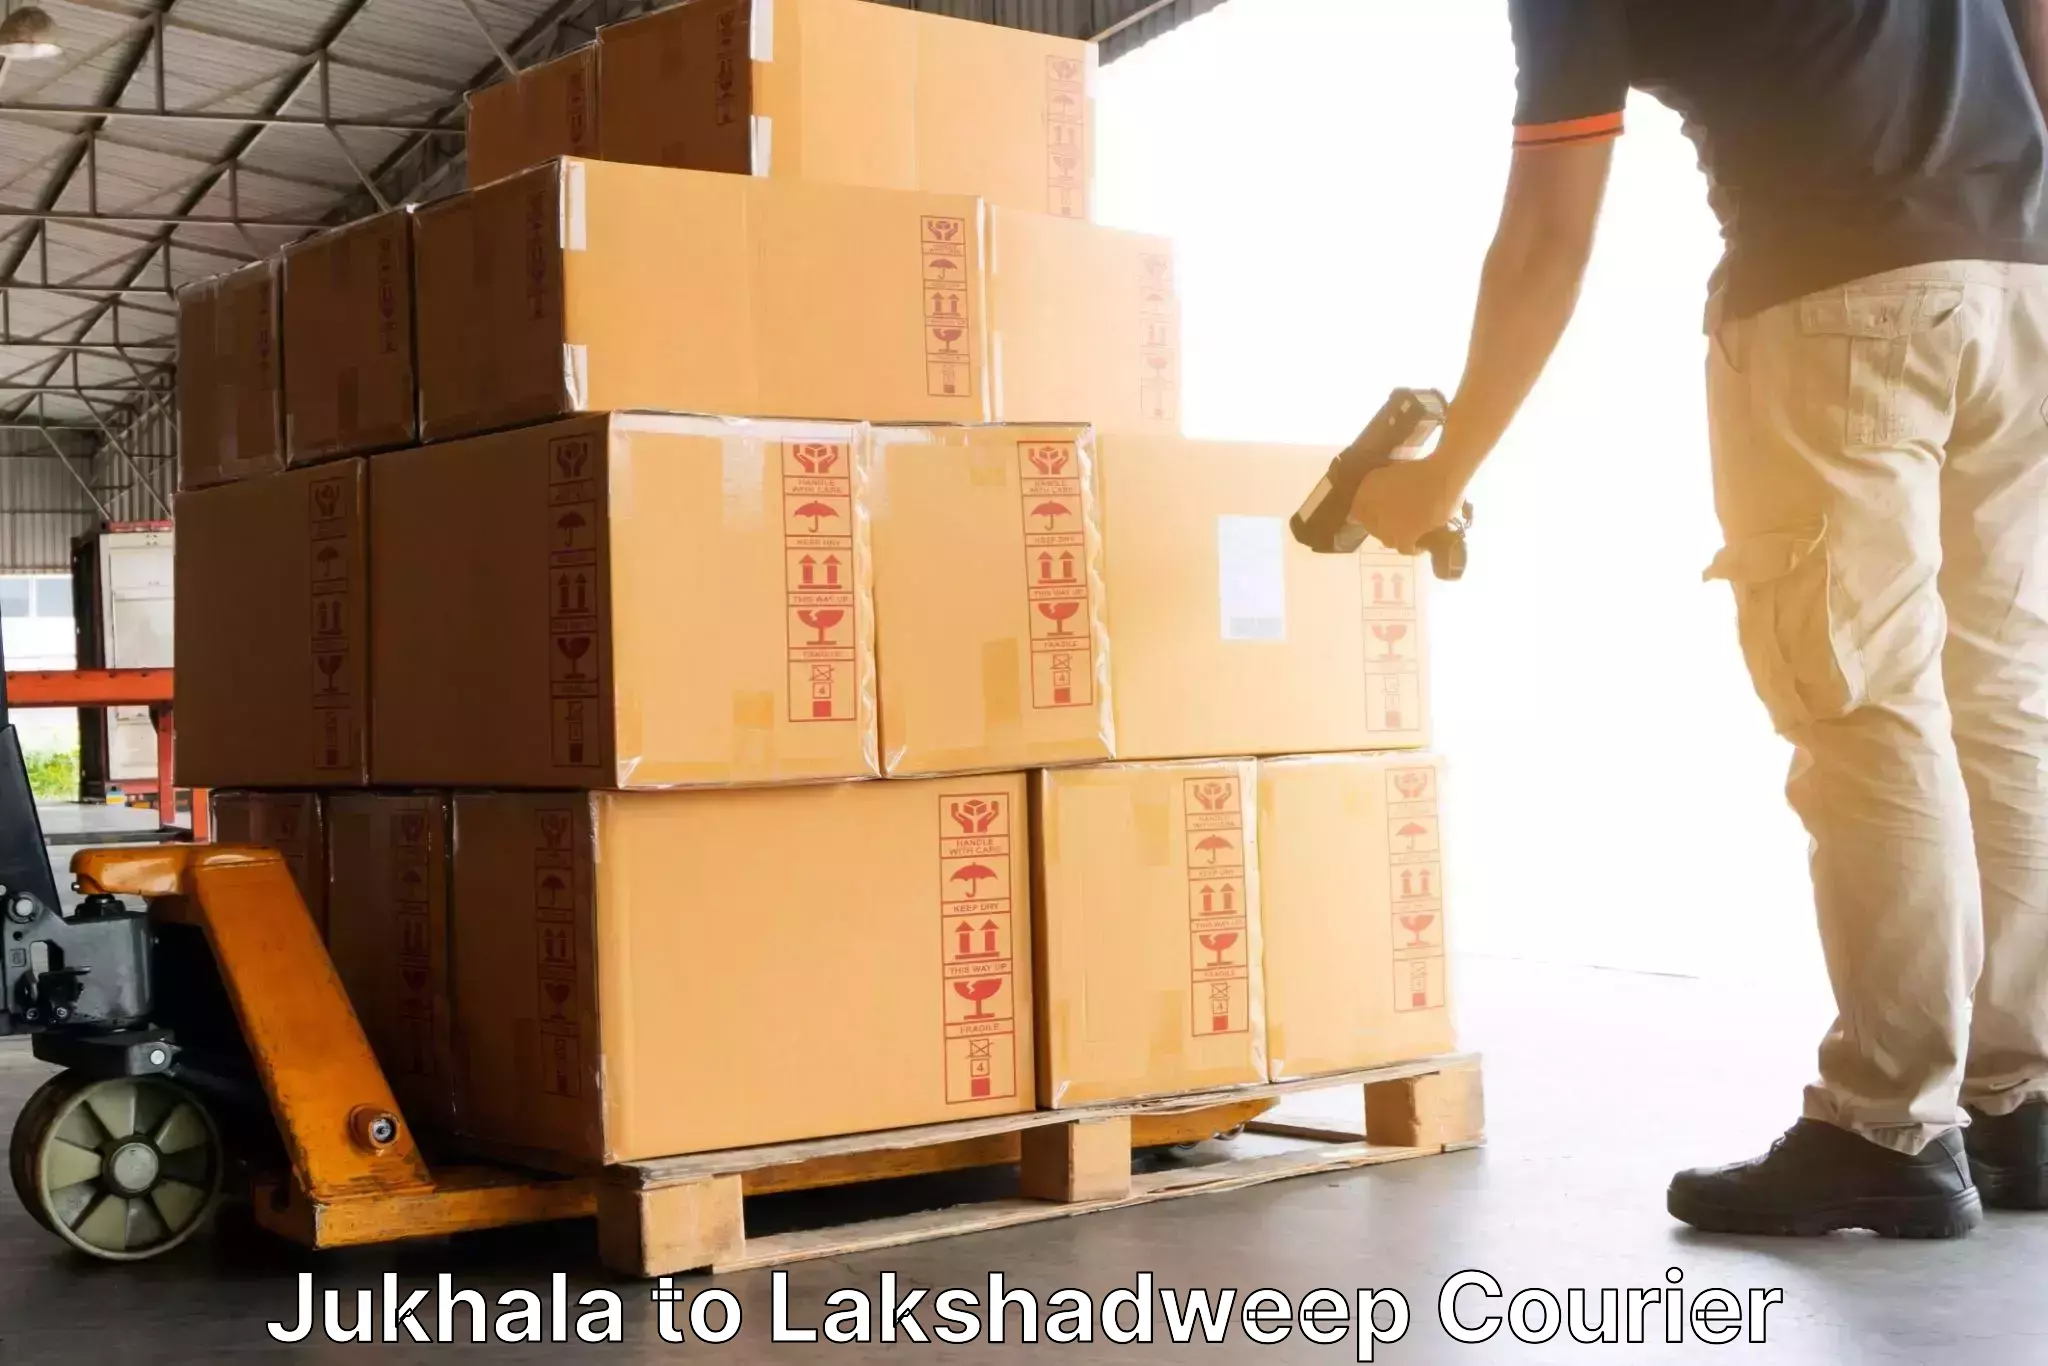 Courier app in Jukhala to Lakshadweep